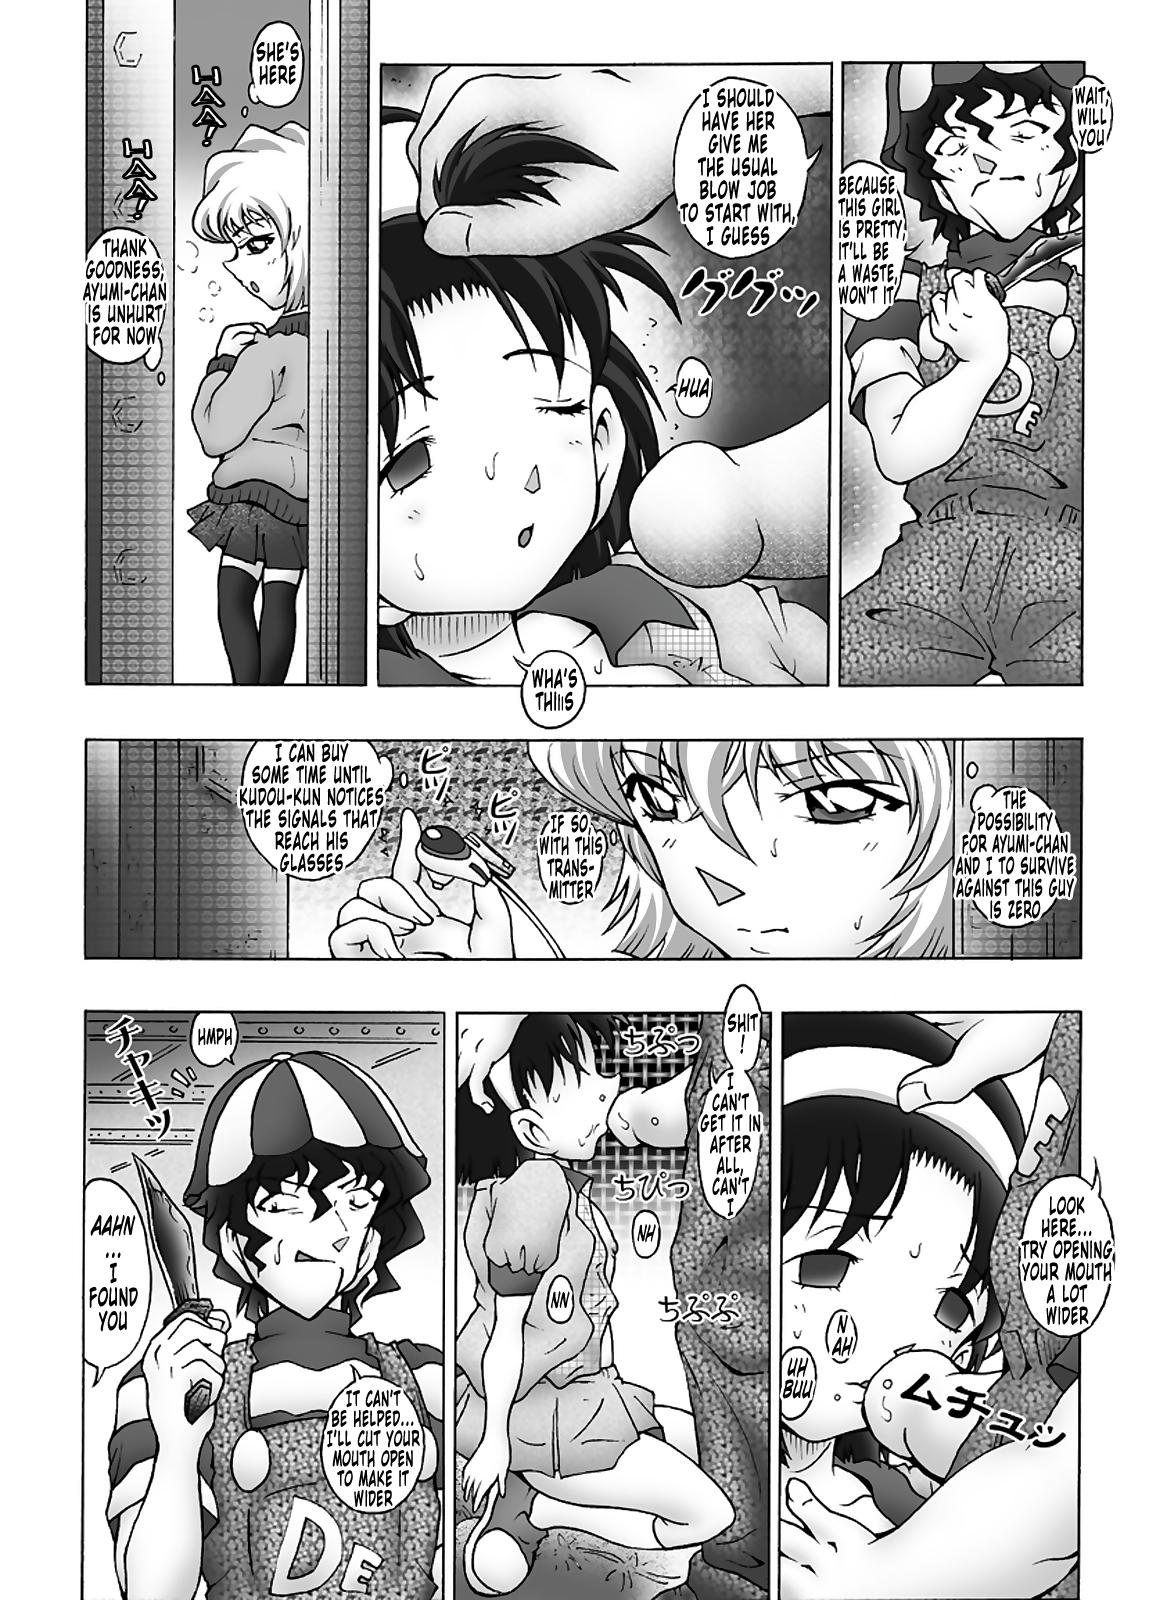 Femboy Bumbling Detective Conan - File 11: The Mystery Of Jack The Ripper's True Identity - Detective conan Gay Money - Page 7